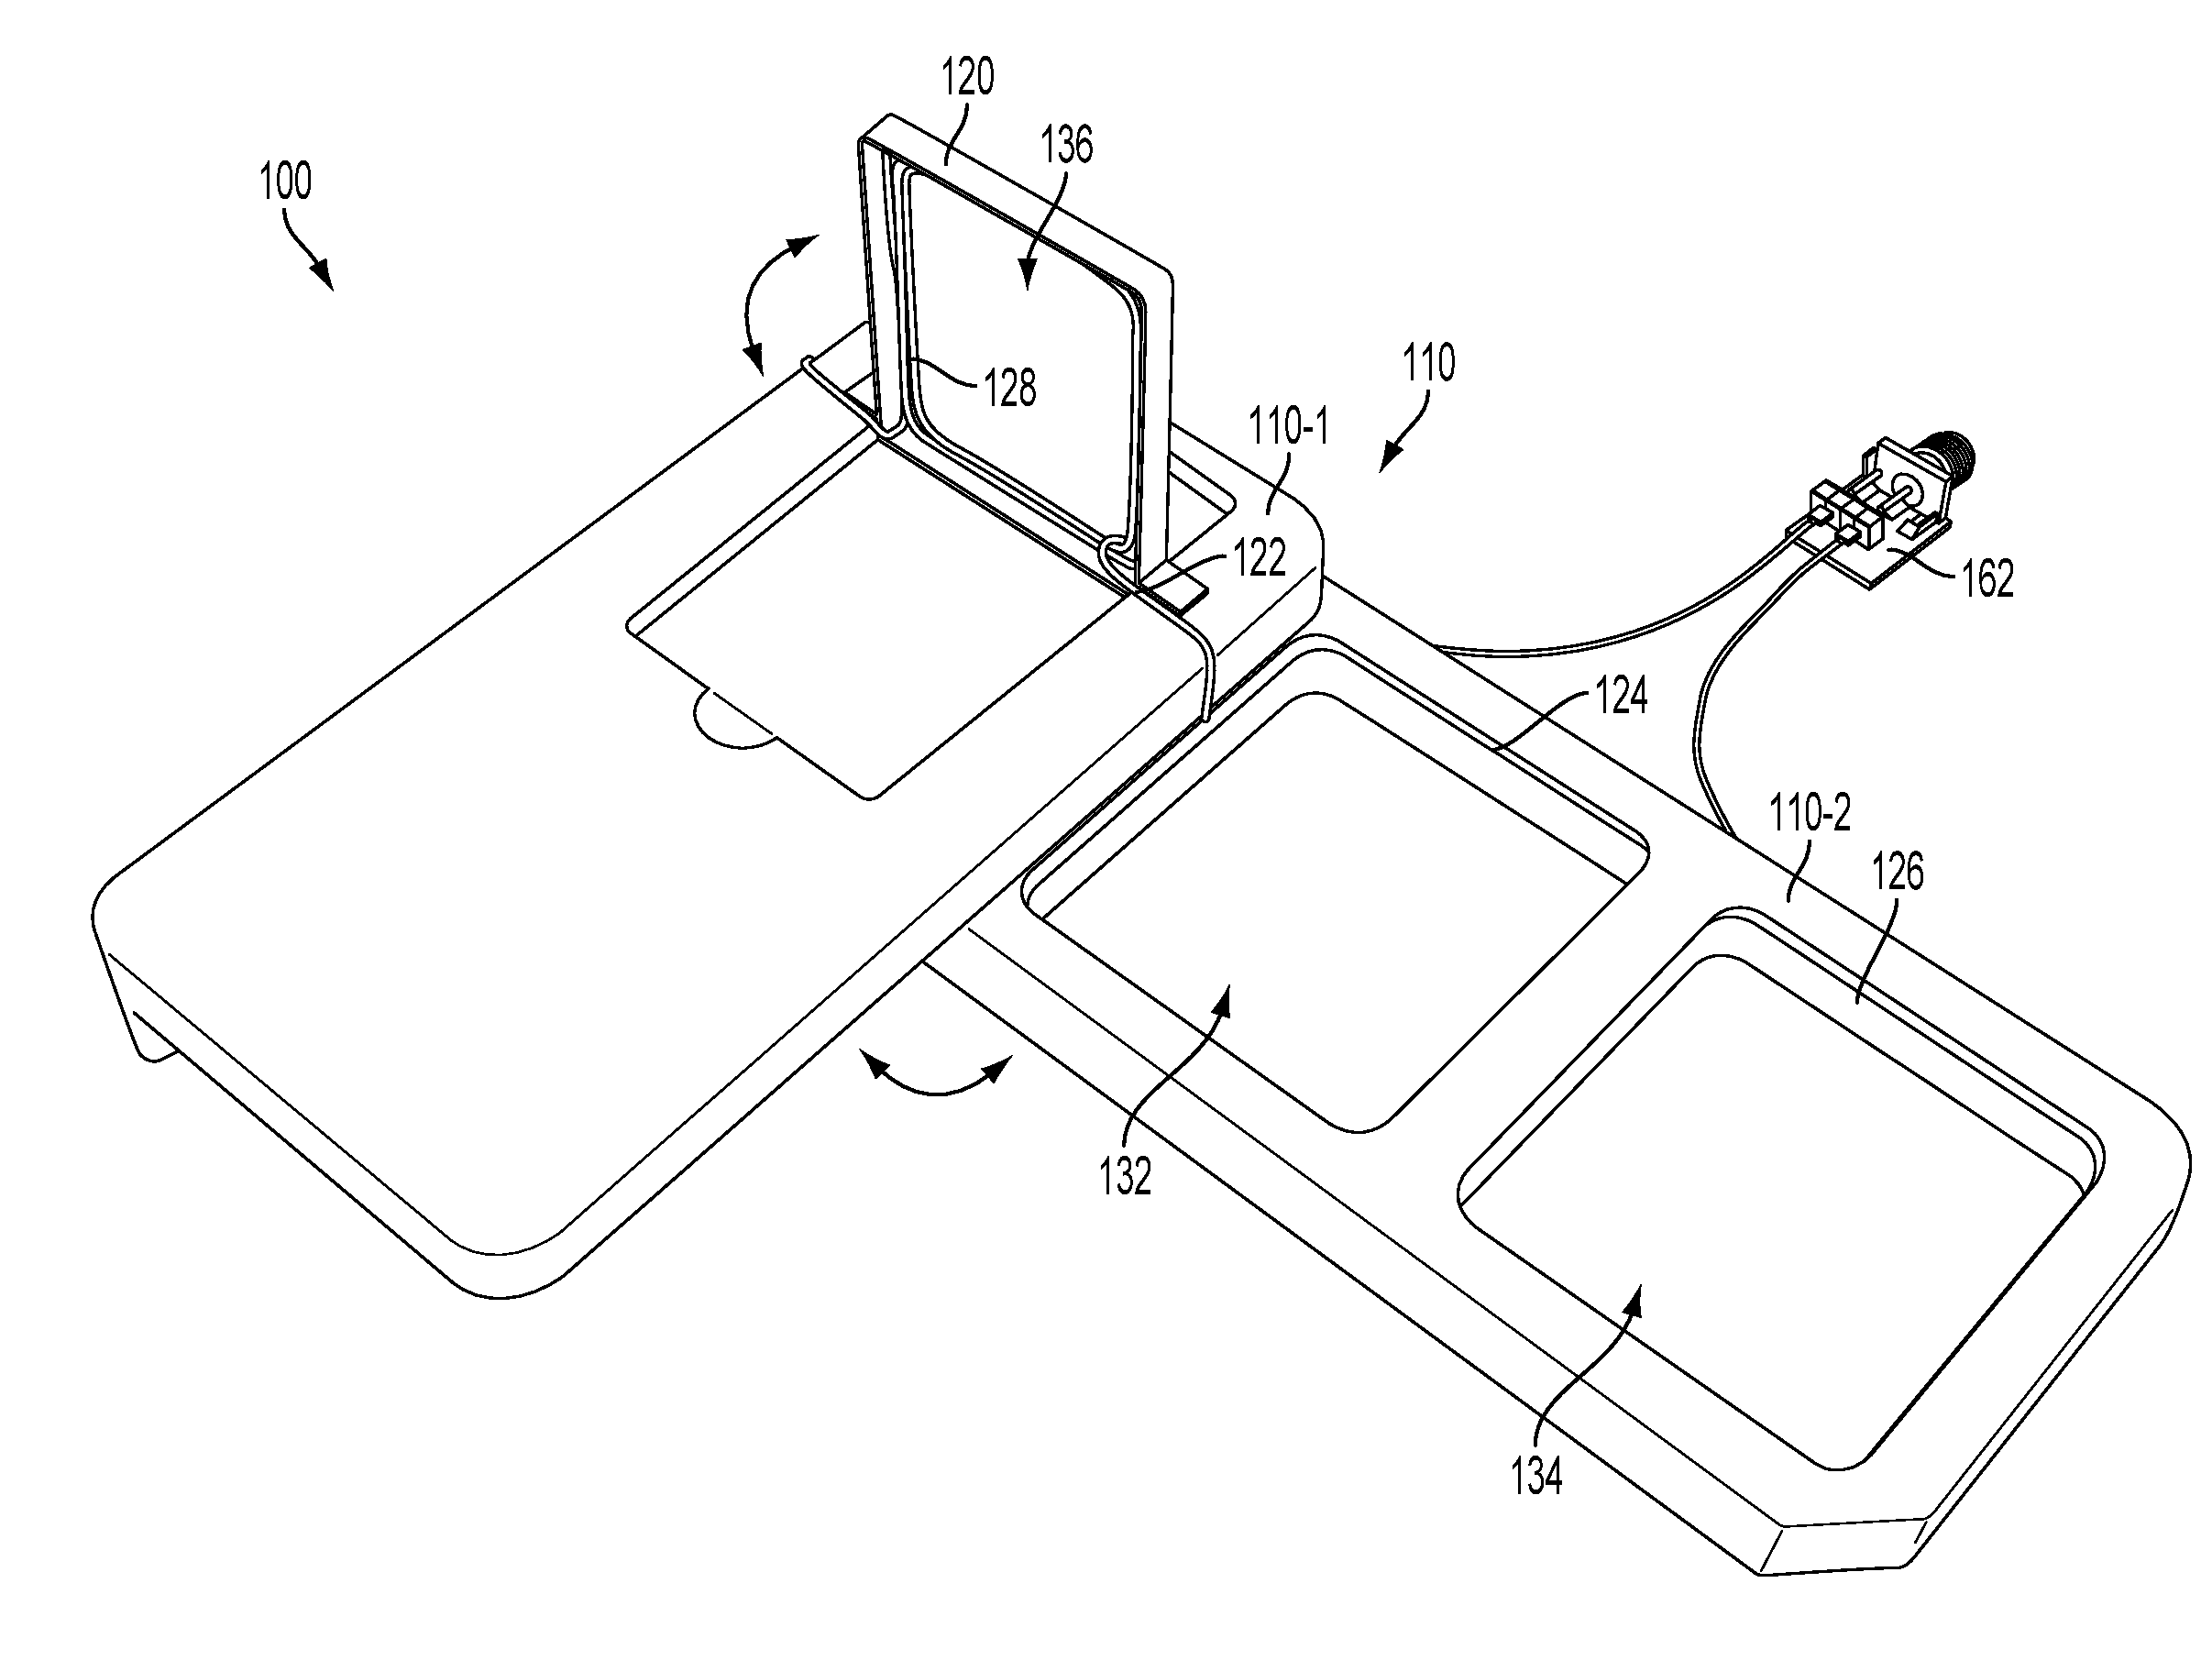 Apparatus for wireless device charging using radio frequency (RF) energy and device to be wirelessly charged